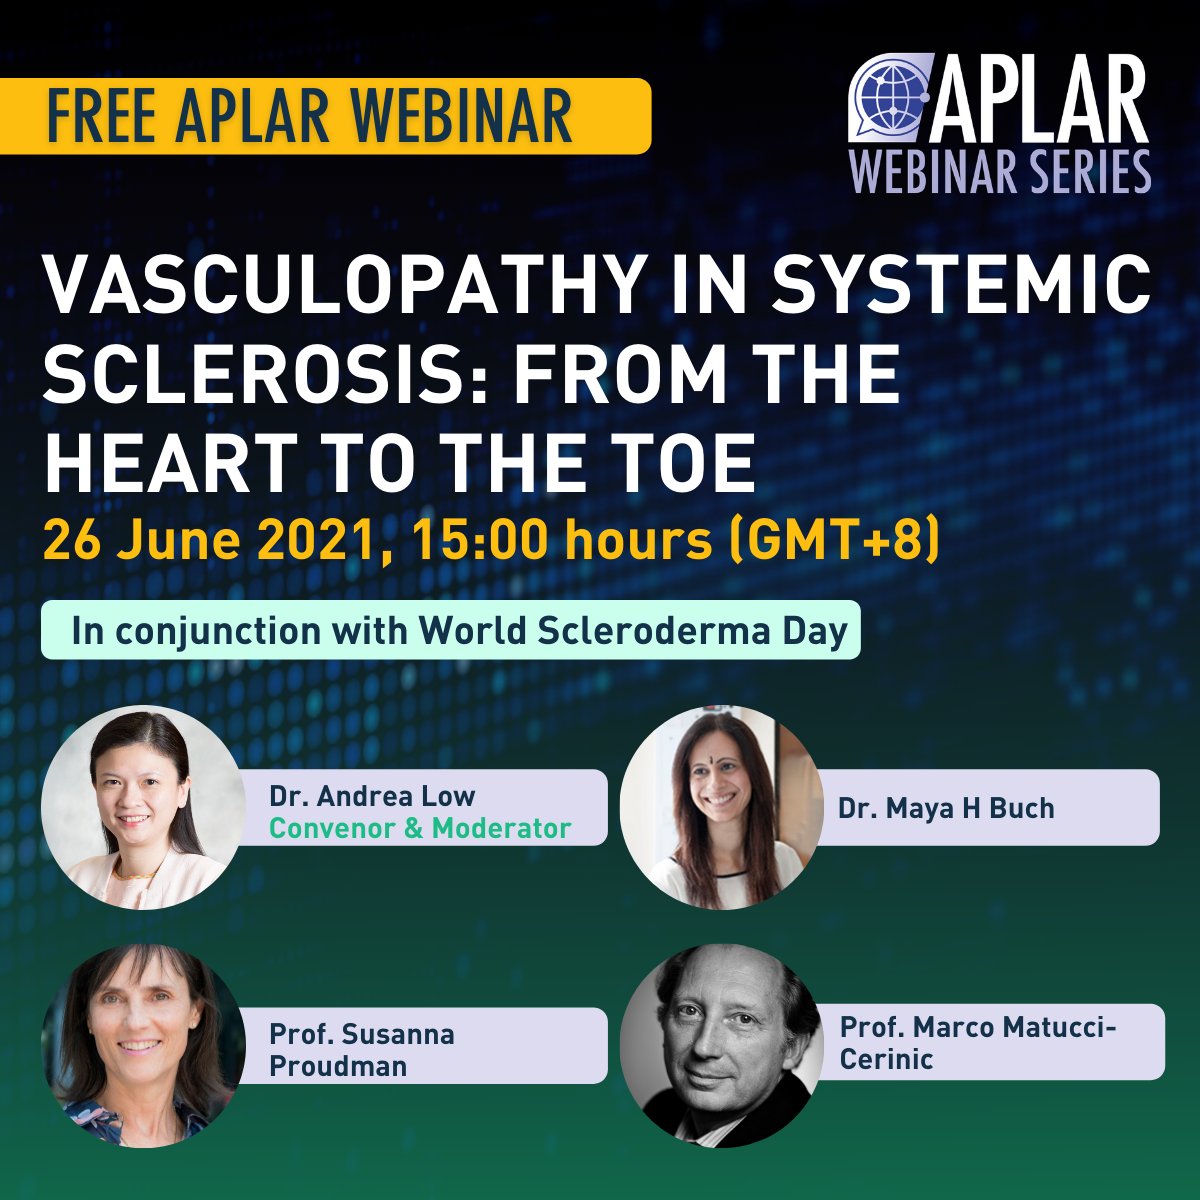 Join us for the APLAR Webinar on Scleroderma on 26 June 2021, in conjunction with World #Scleroderma Day. Topics from treatment approaches in SSc-associated pulmonary hypertension, evaluation & mgmt of digital ulcers in SSc & more. Register for FREE: aplarwebinars.delegateconnect.co/pages/aplar-we…